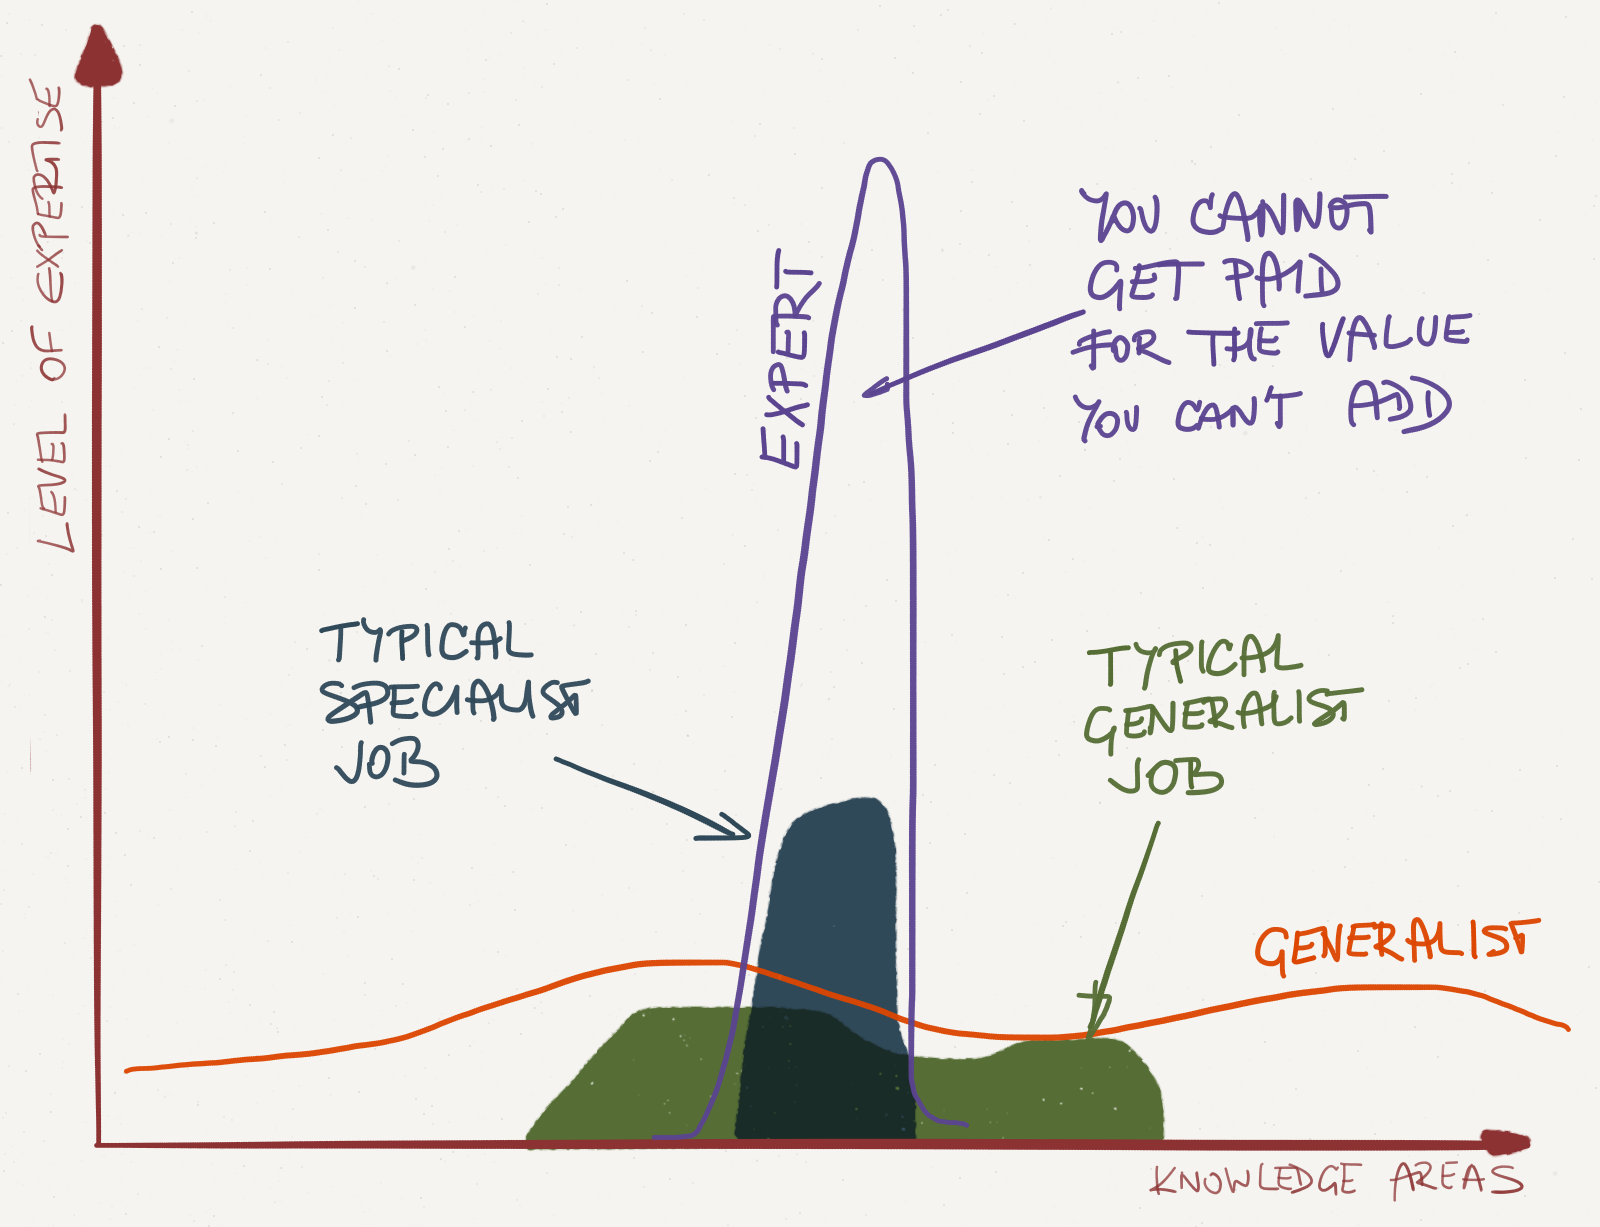 T-Shaped Skills & Their Importance in Hiring